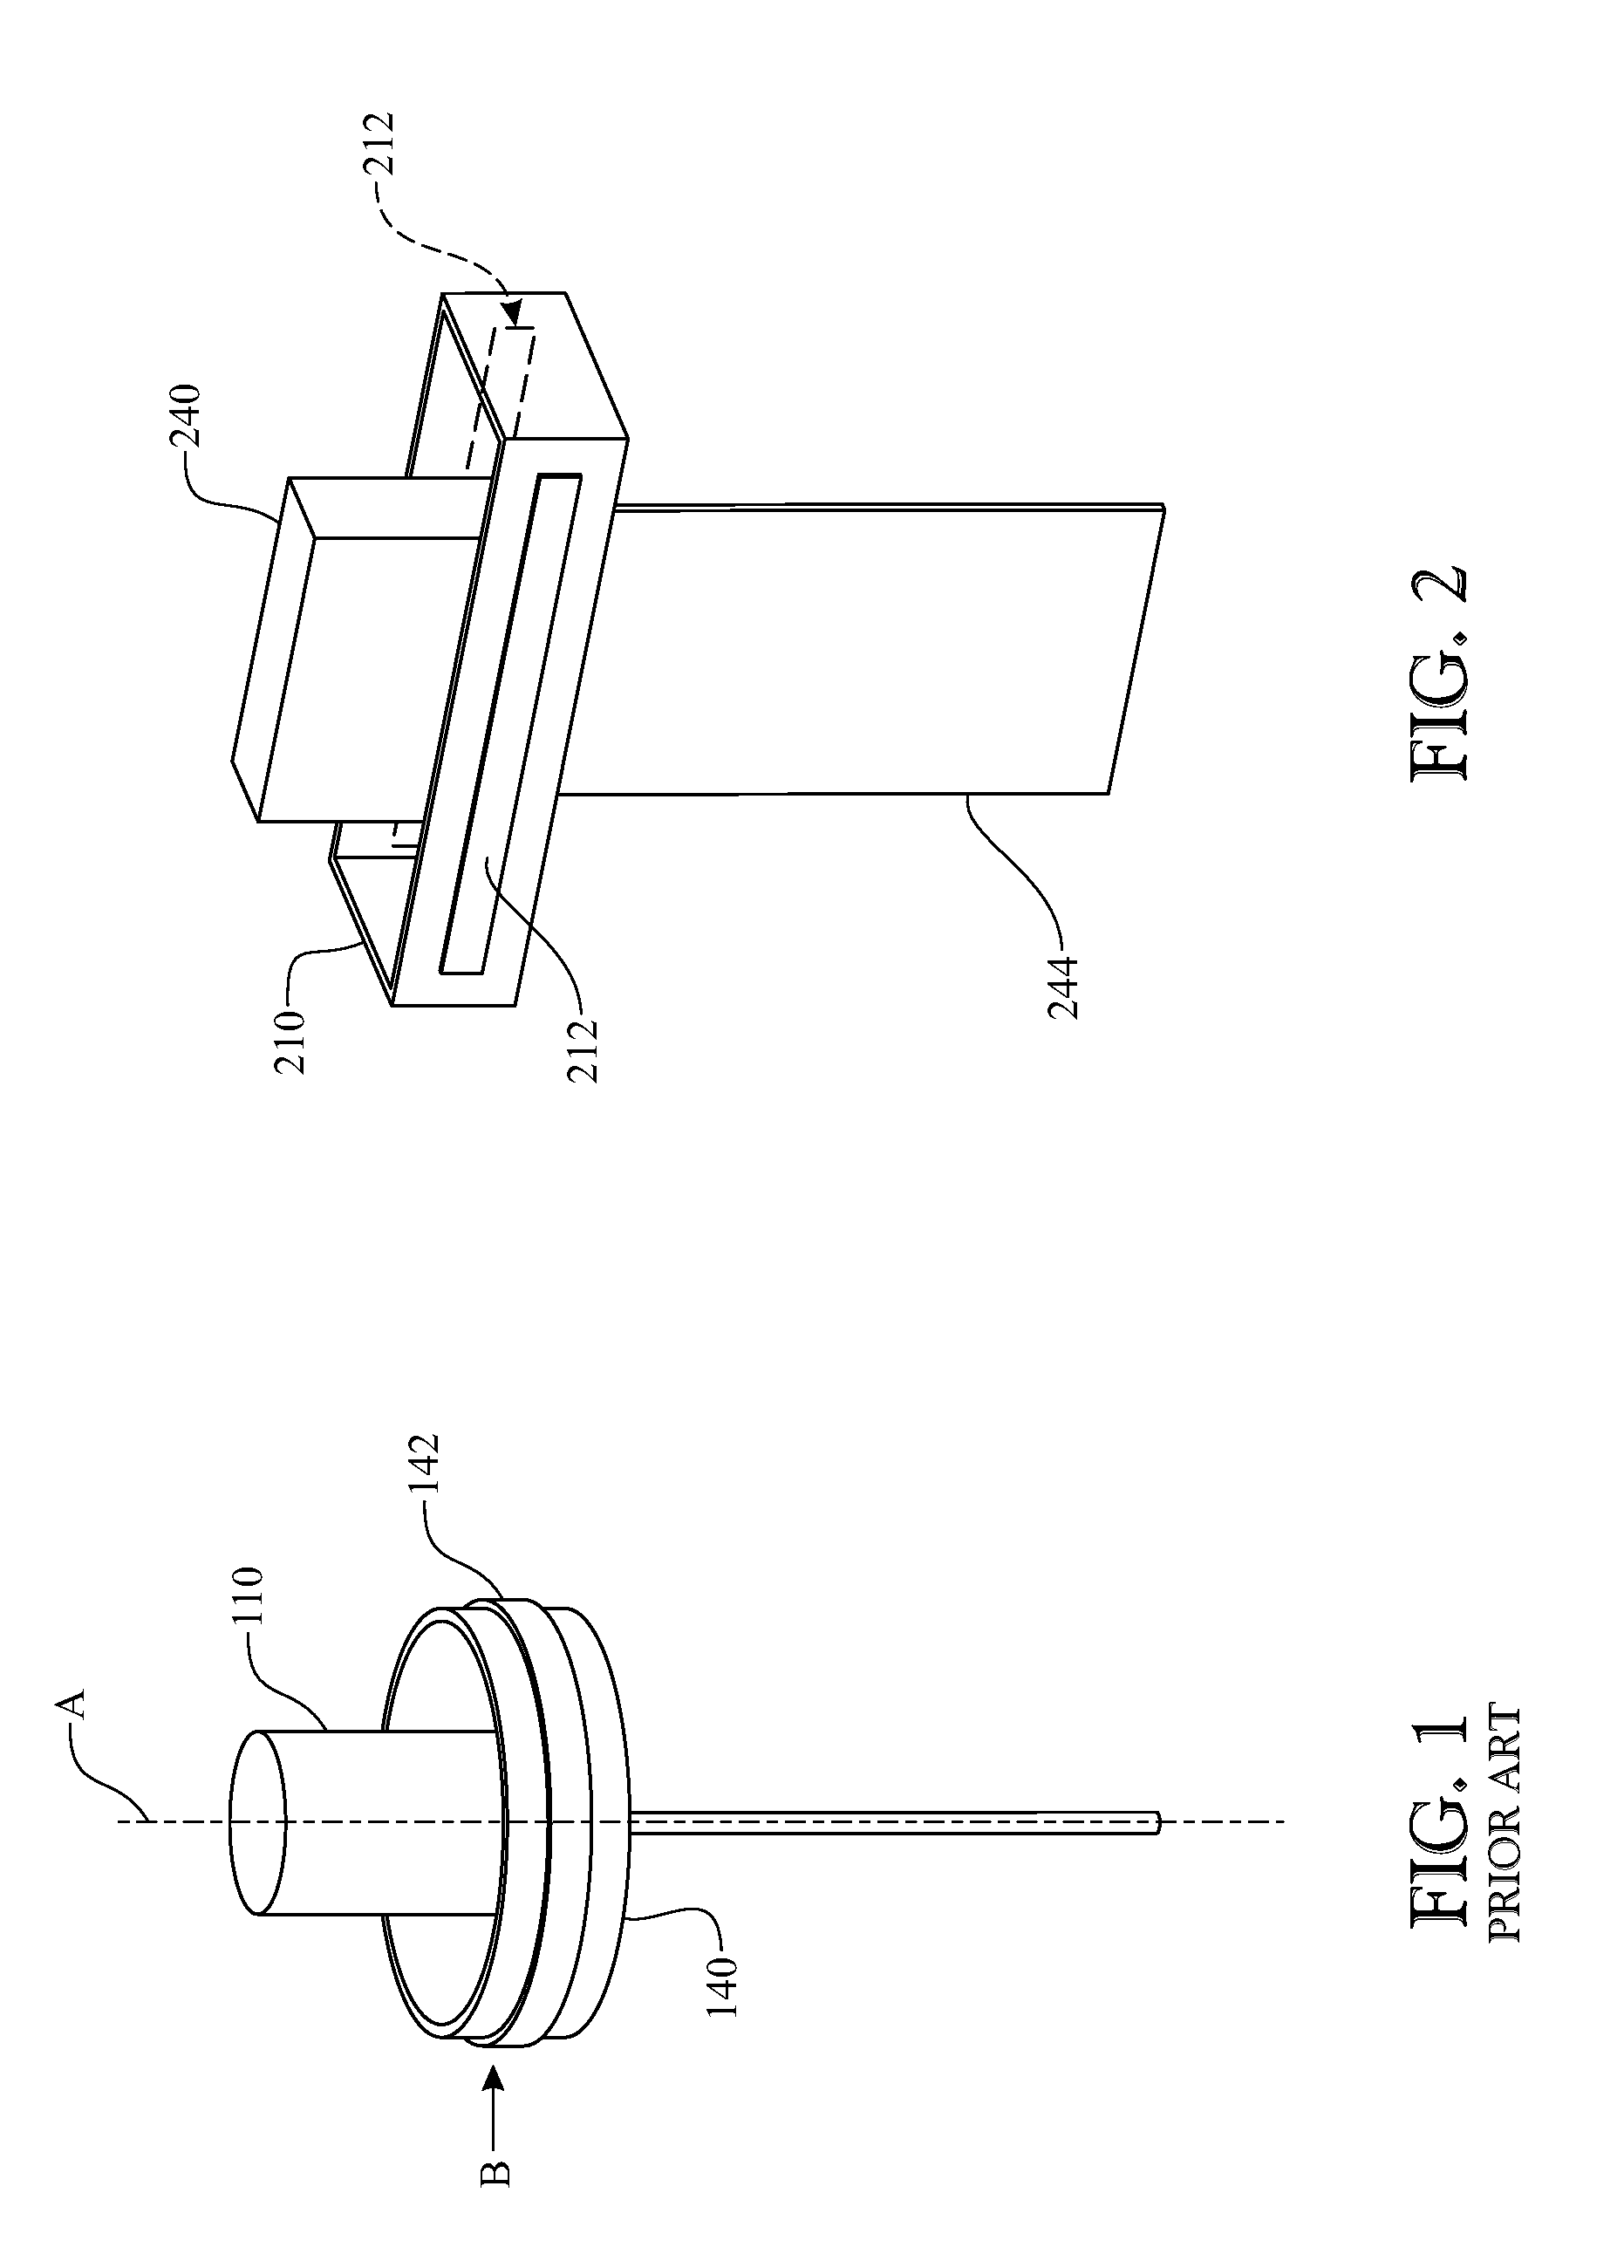 Method of thermally drawing structured sheets